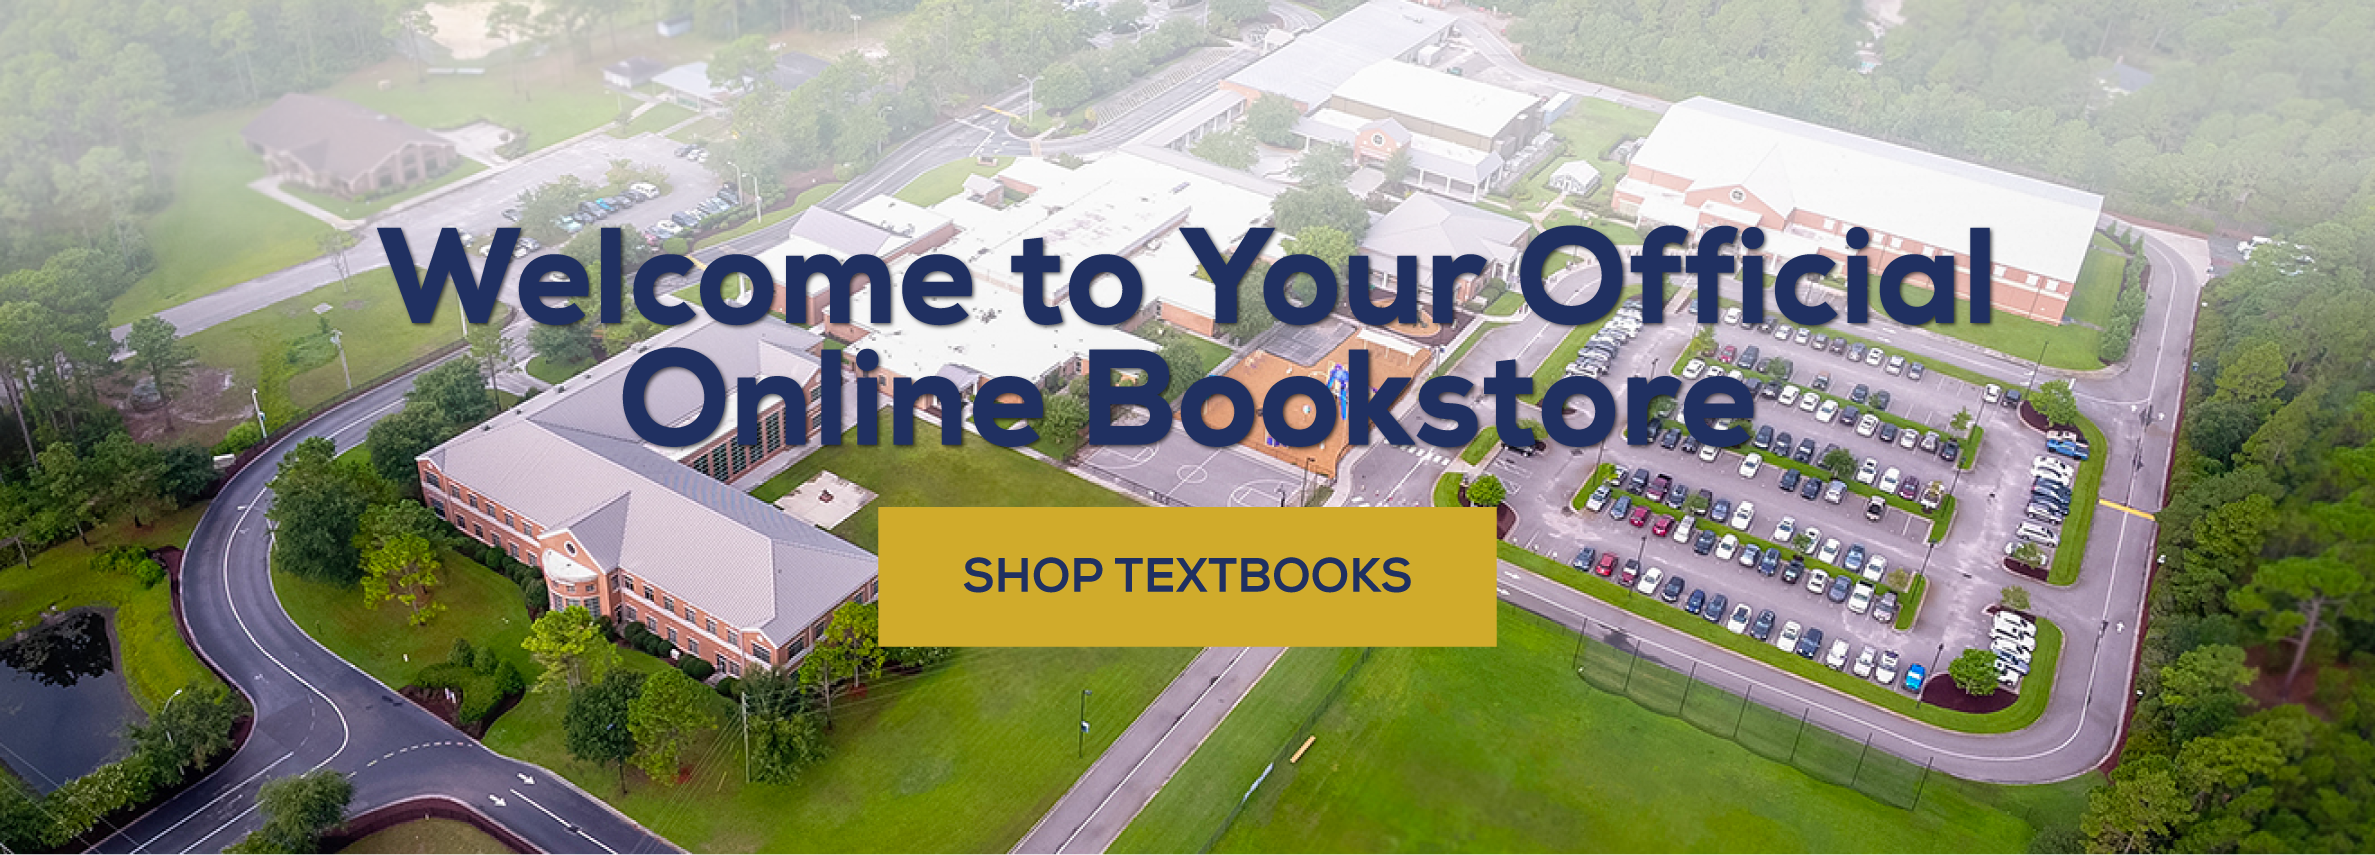 Welcome to your official online bookstore. Shop Textbooks